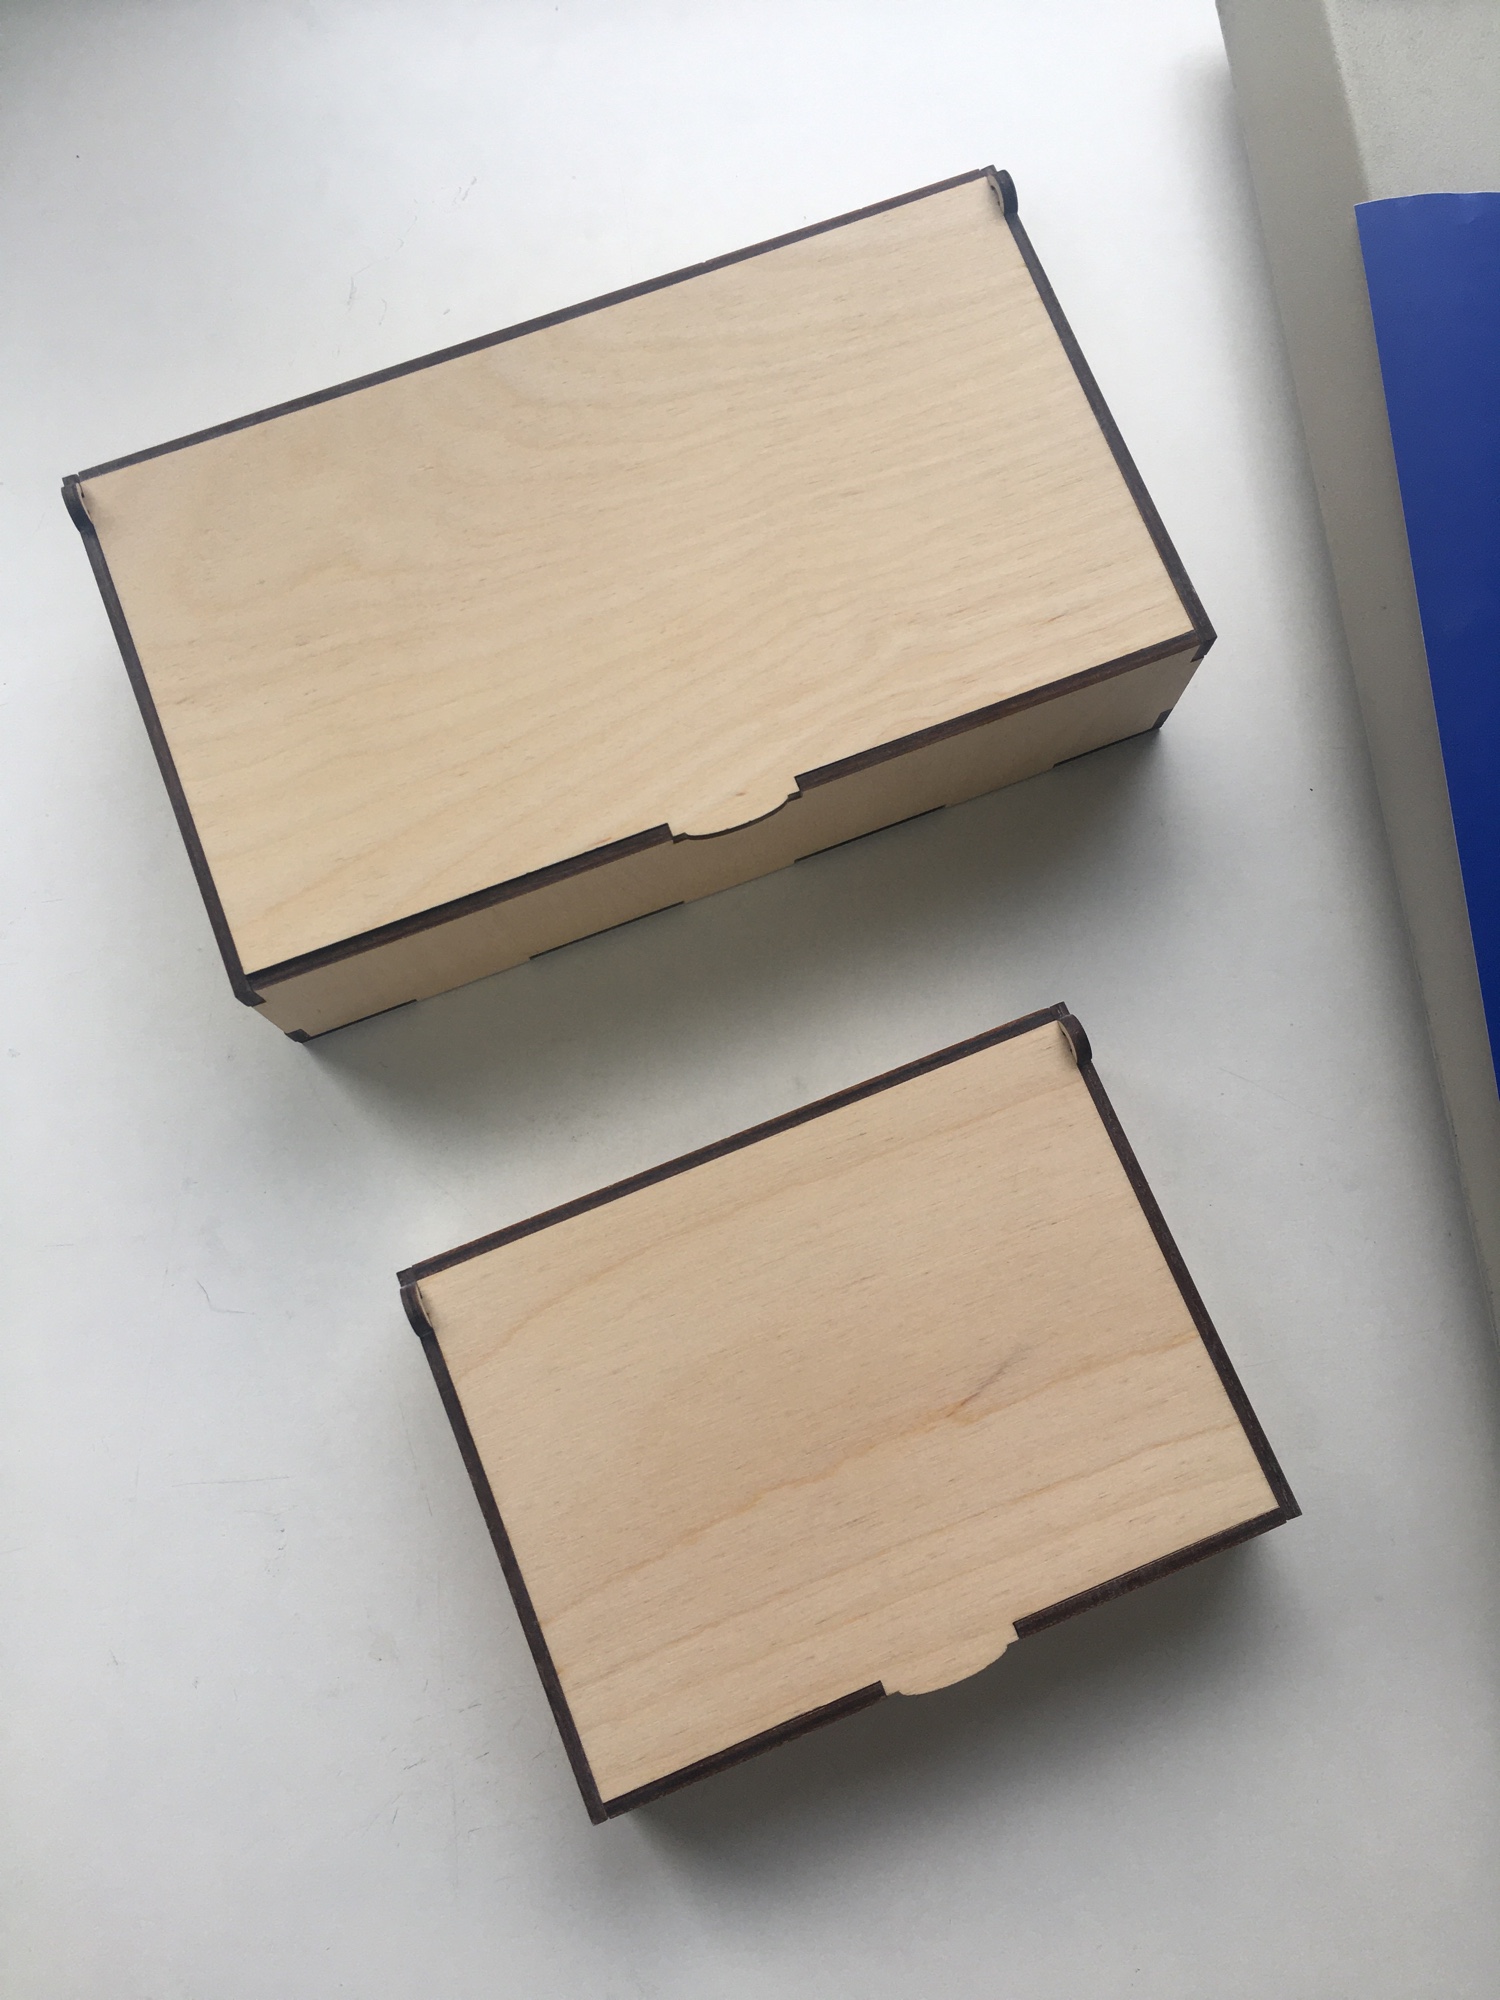 Laser Cut Wooden Boxes With Lids Free Vector cdr Download 3axis.co